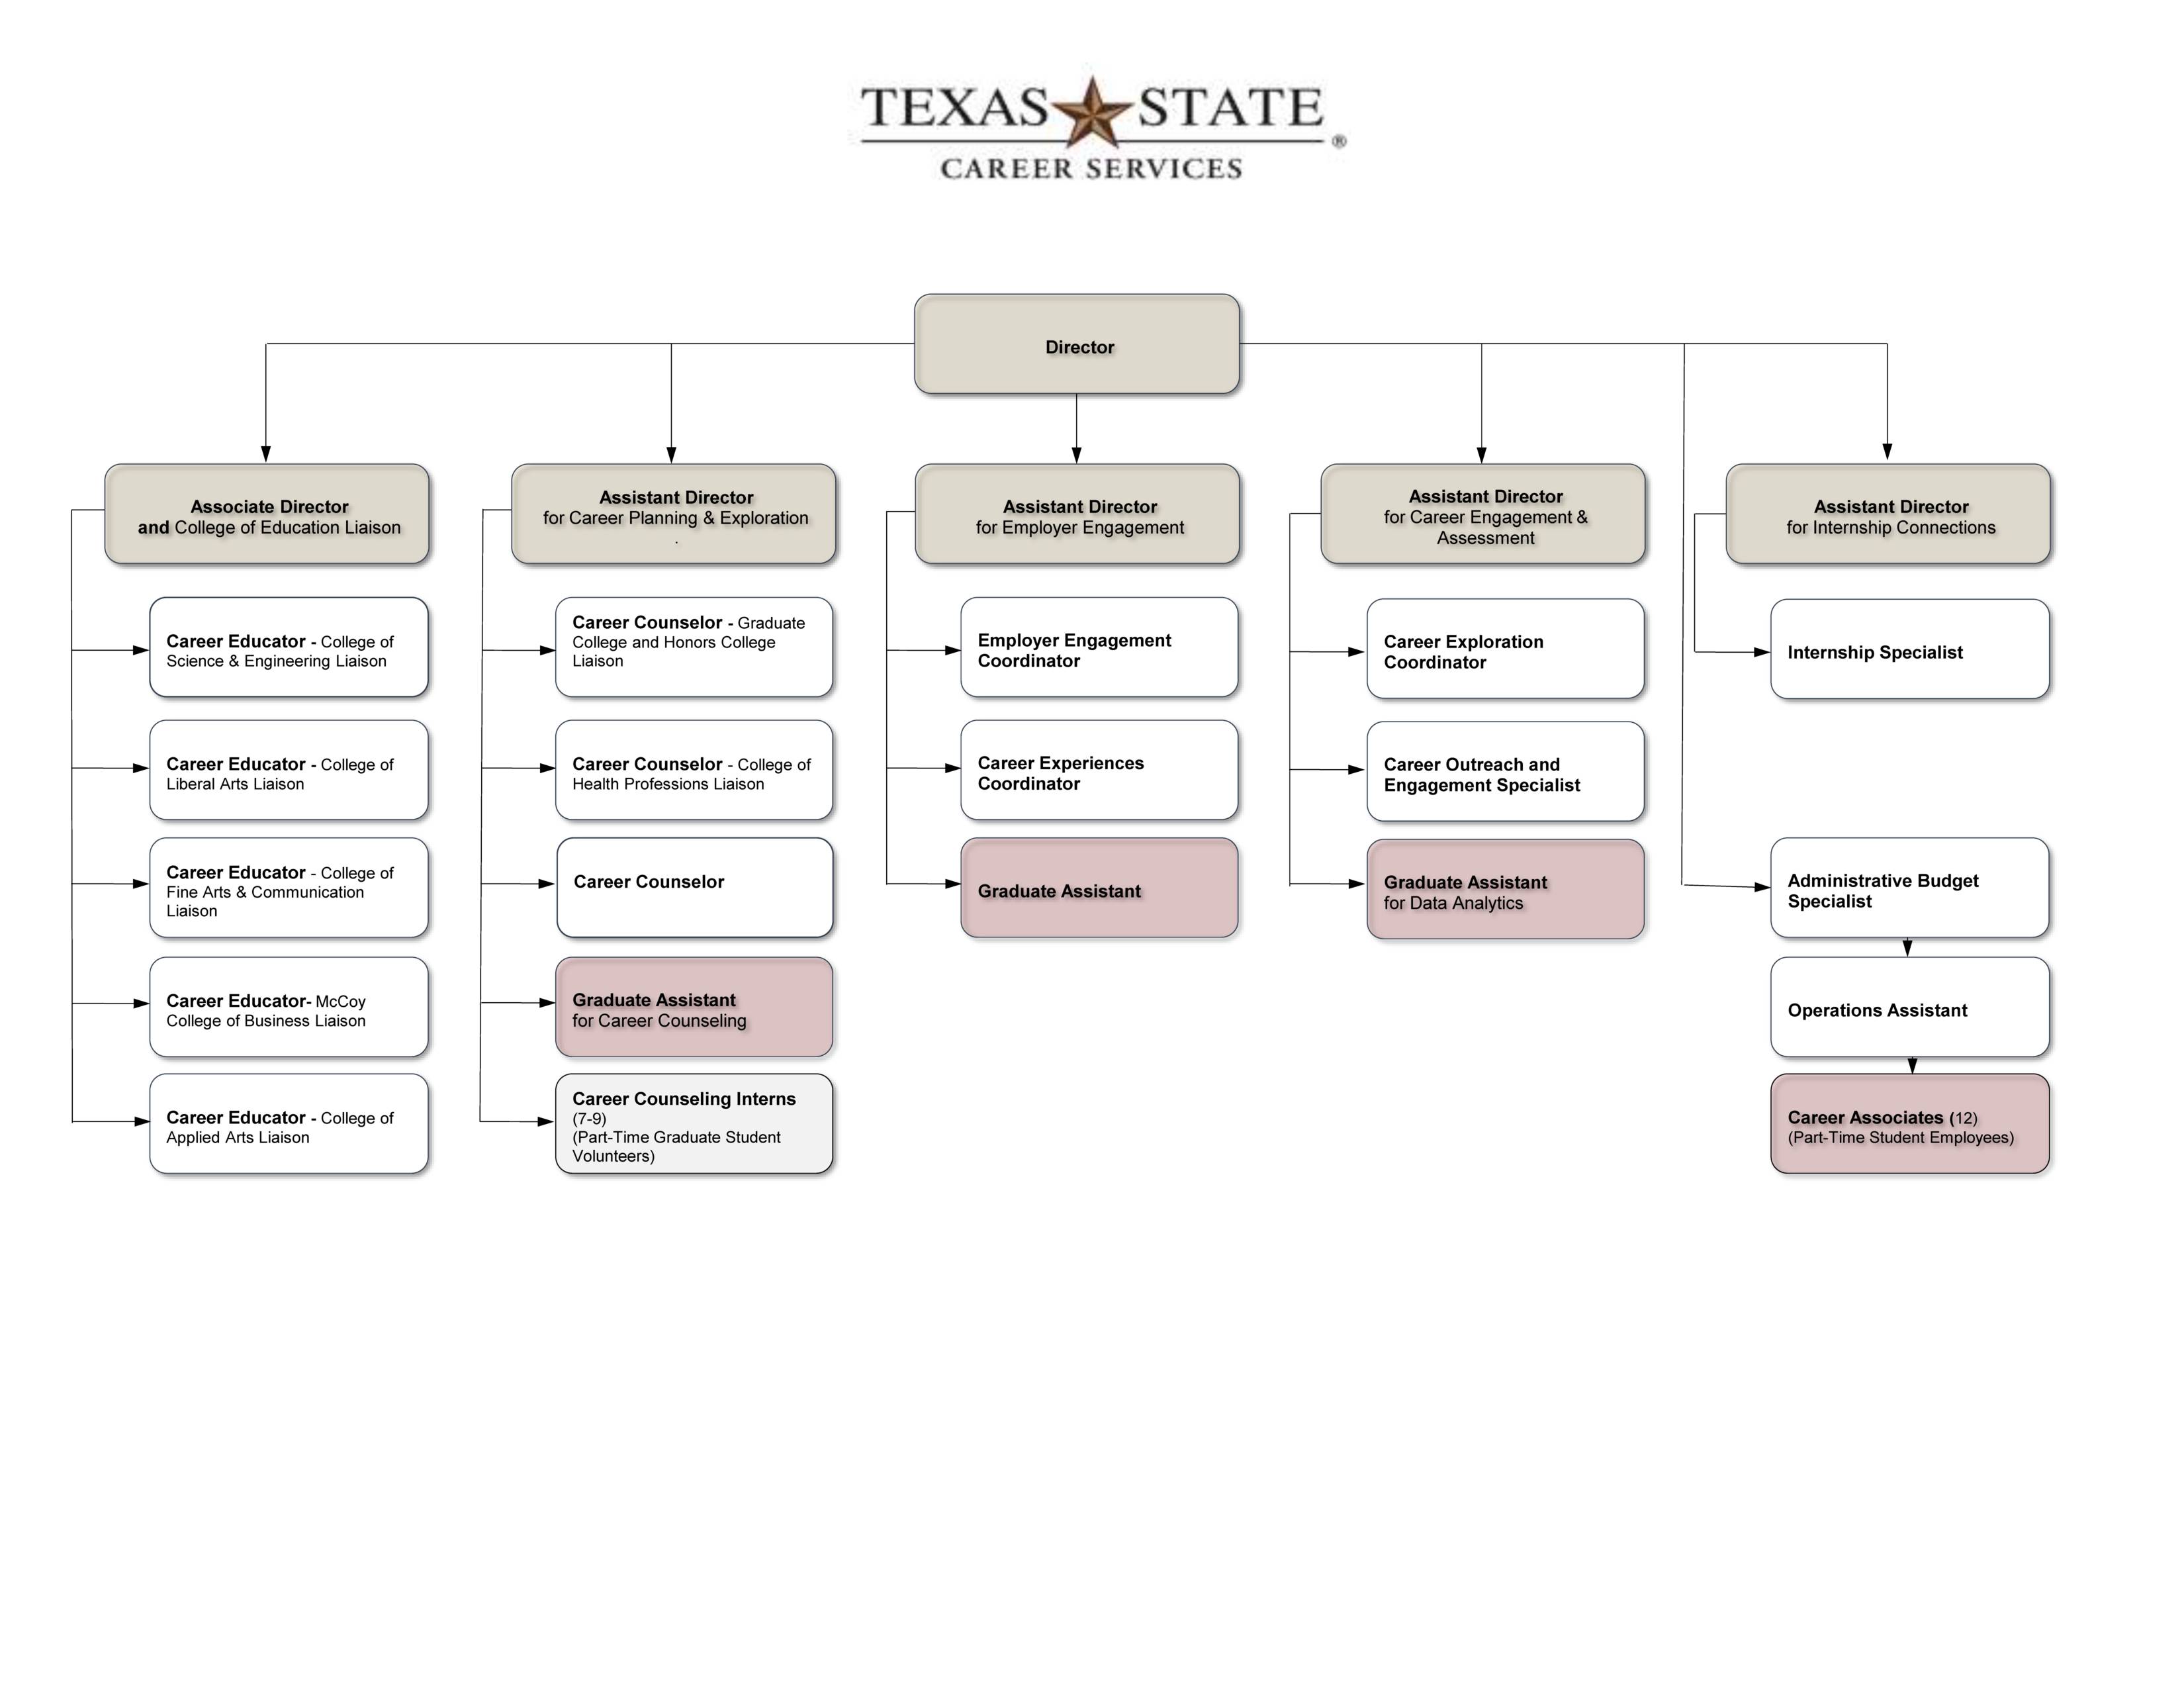 organizational chart for Career Services